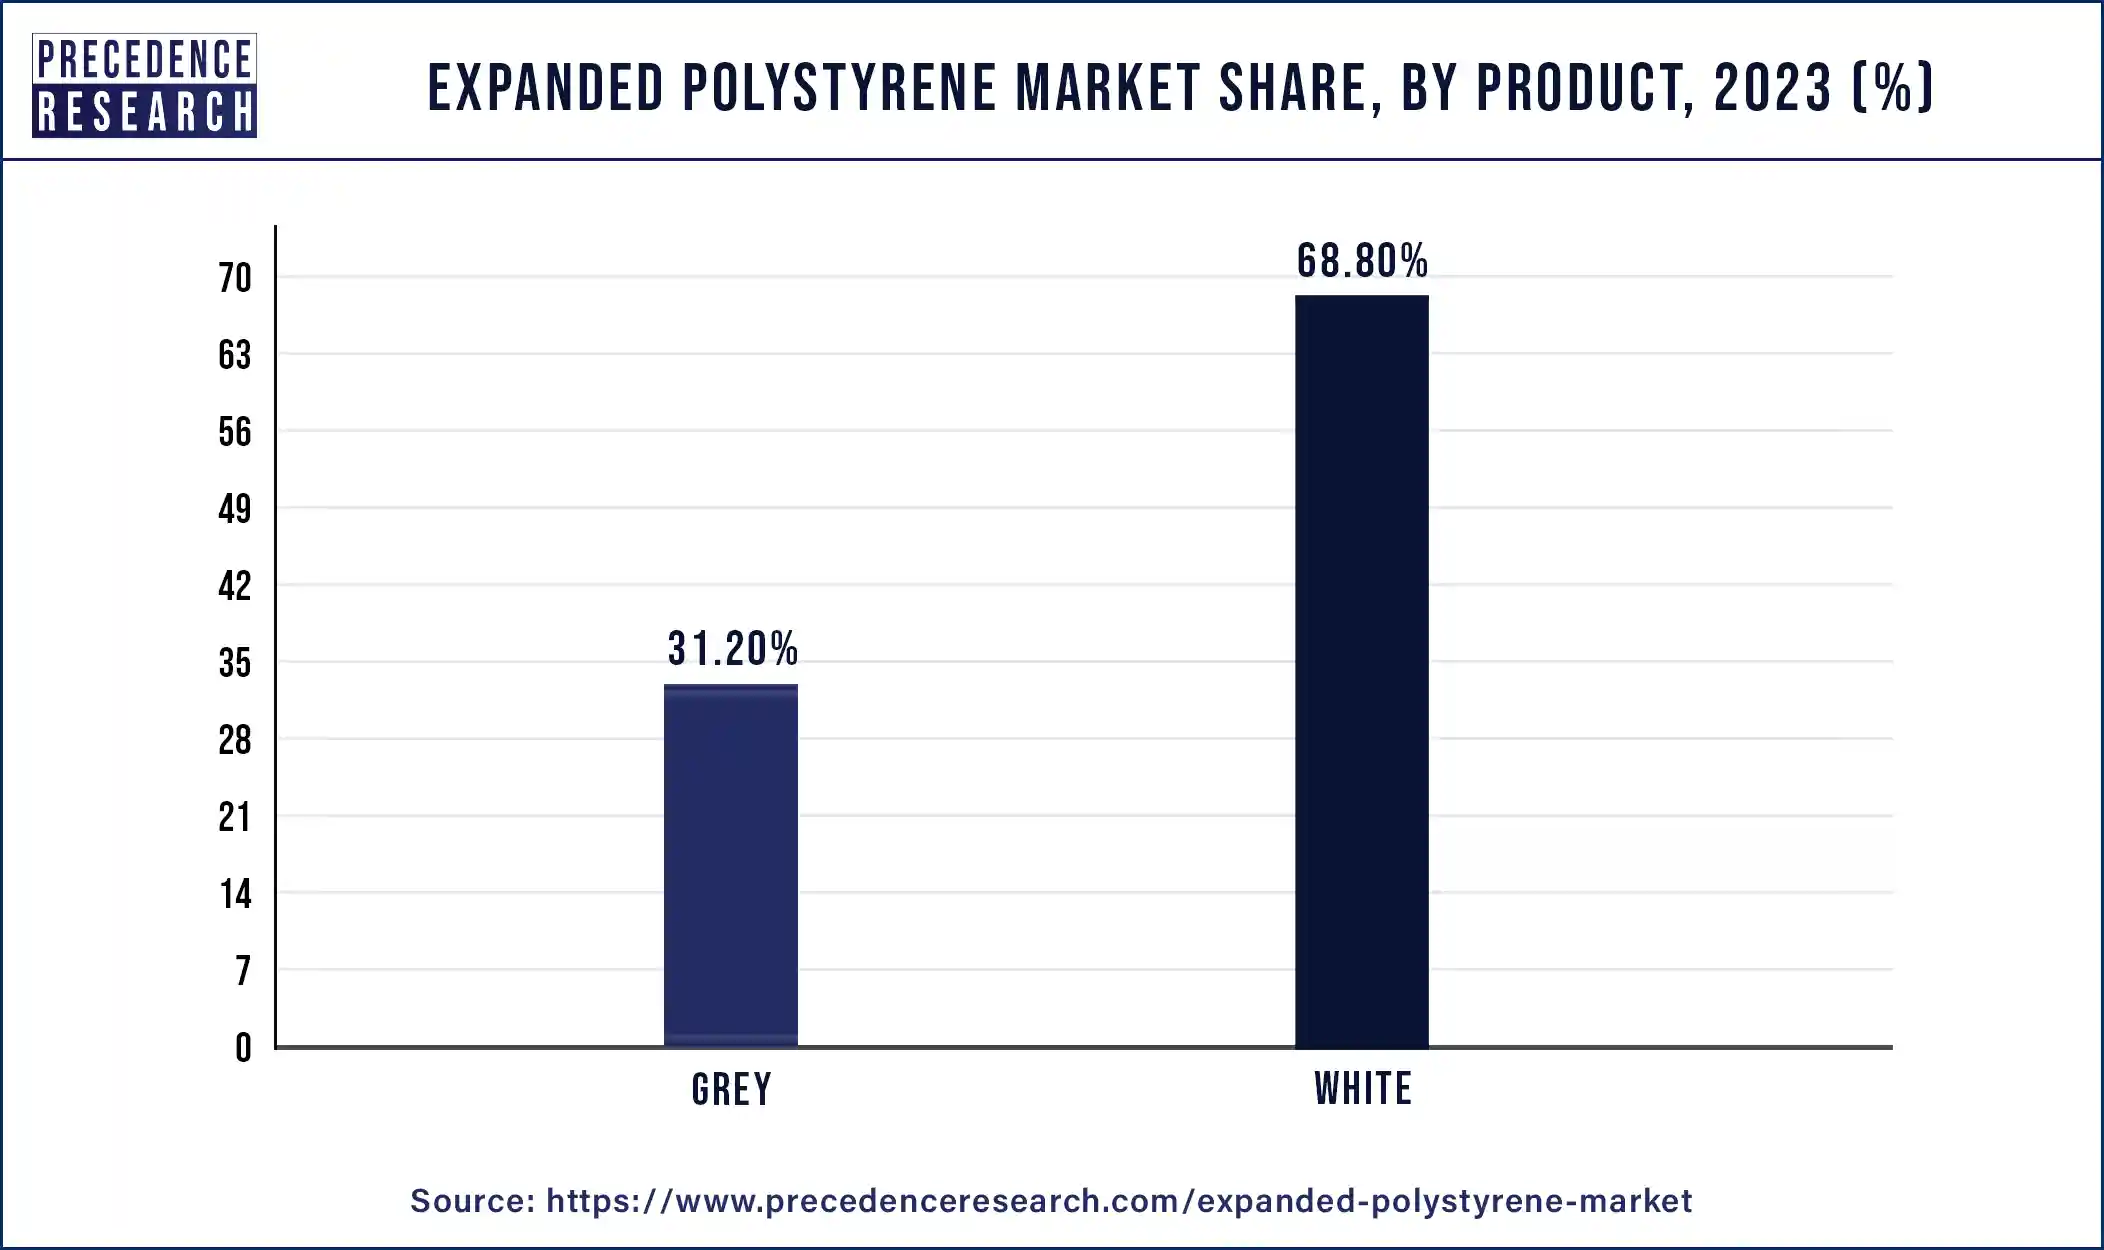 Expanded Polystyrene Market Share, By Product, 2023 (%)